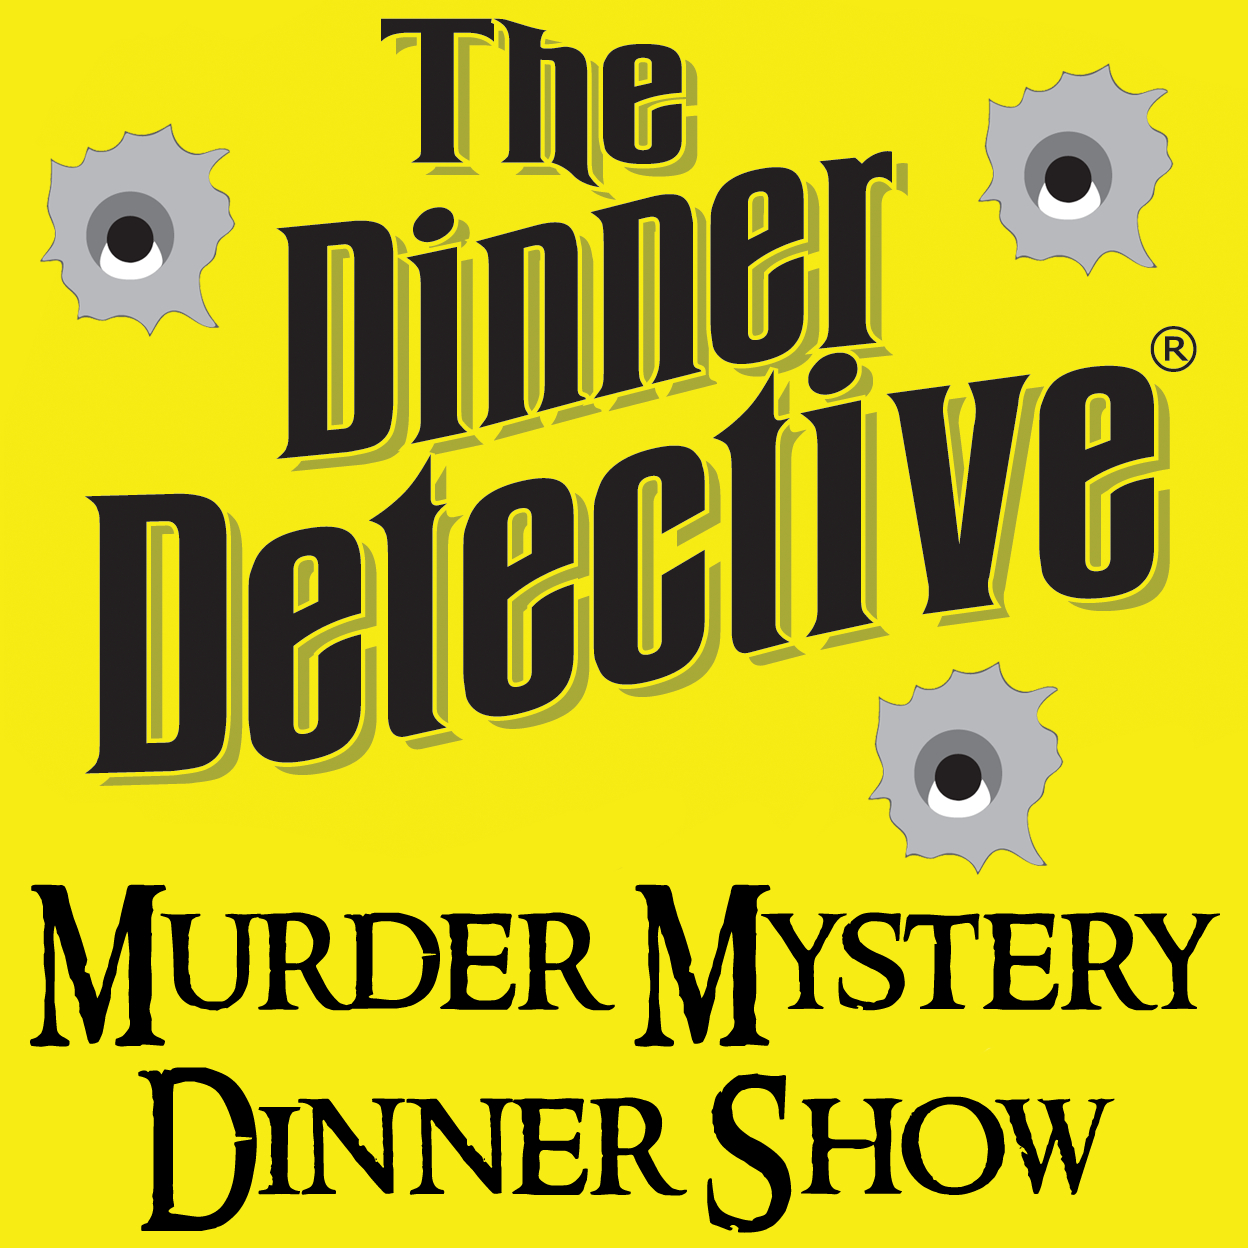 The Dinner Detective Murder Mystery Show Announces a Grand-Opening in Lexington, KY